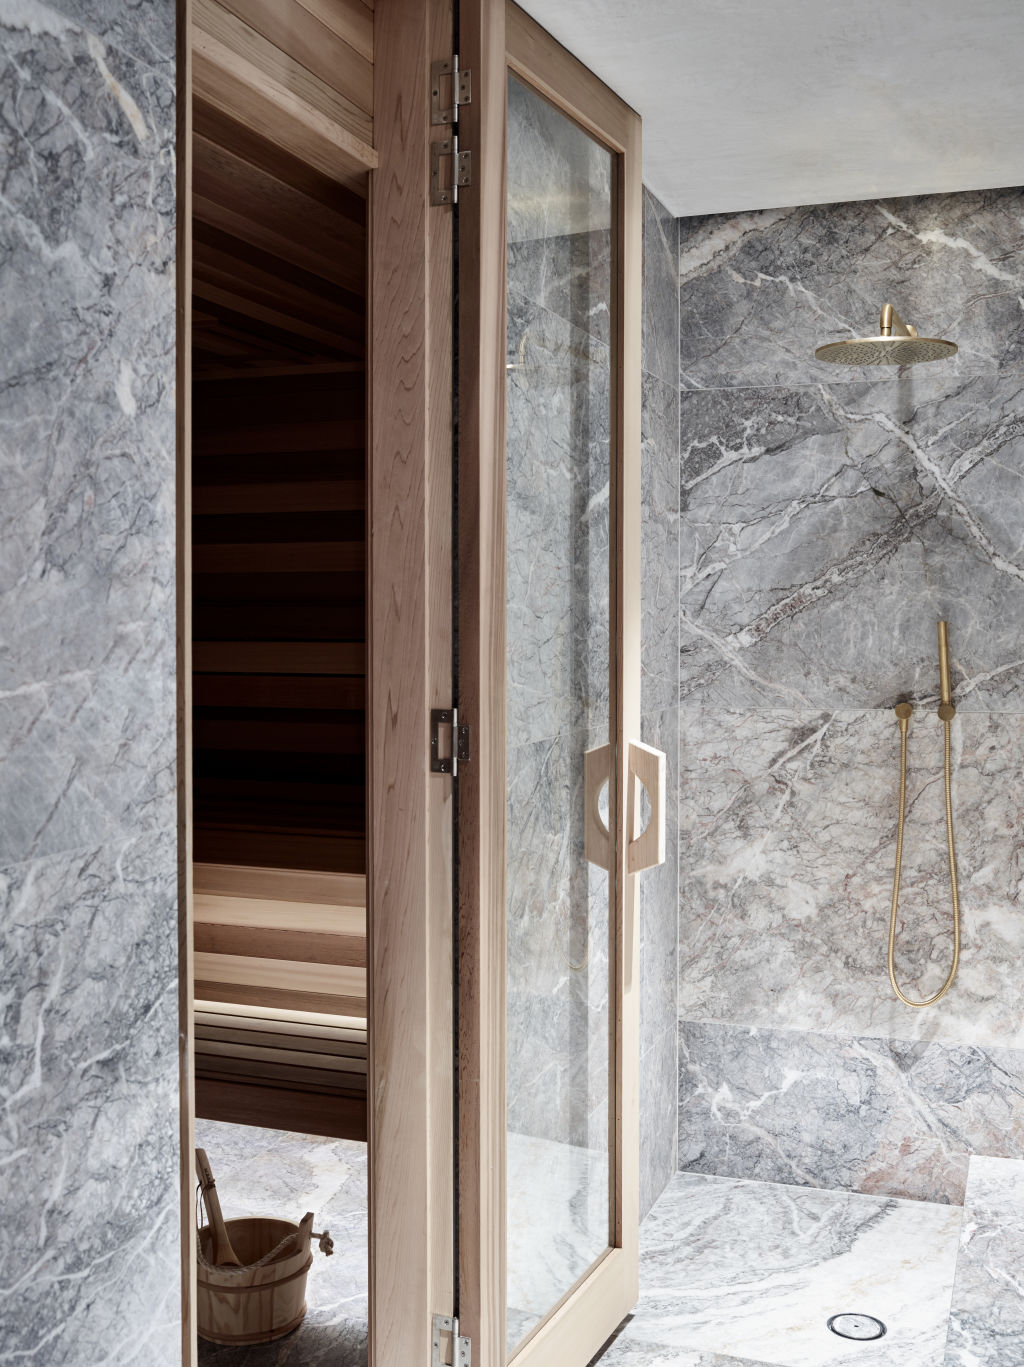 The sauna at Armadale Residence by Rob Mills Architecture & Interiors. Photo: Mark Roper